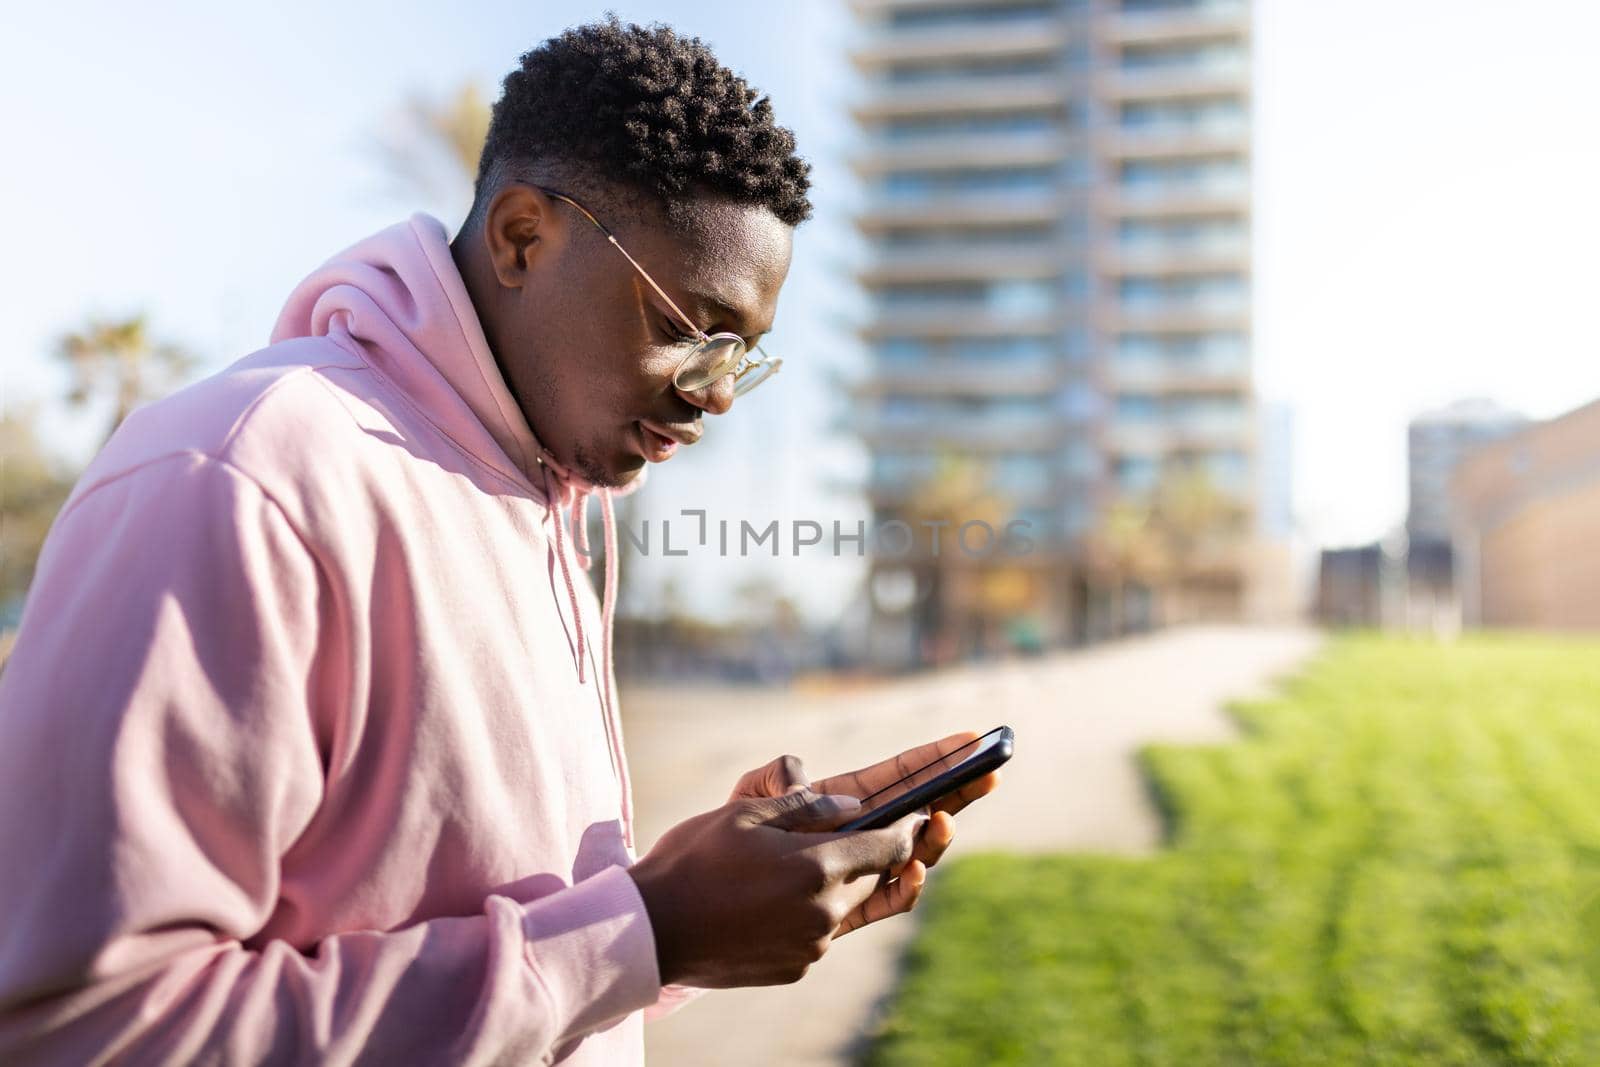 Black man outdoors using mobile phone to send text message. Copy space. Lifestyle concept.